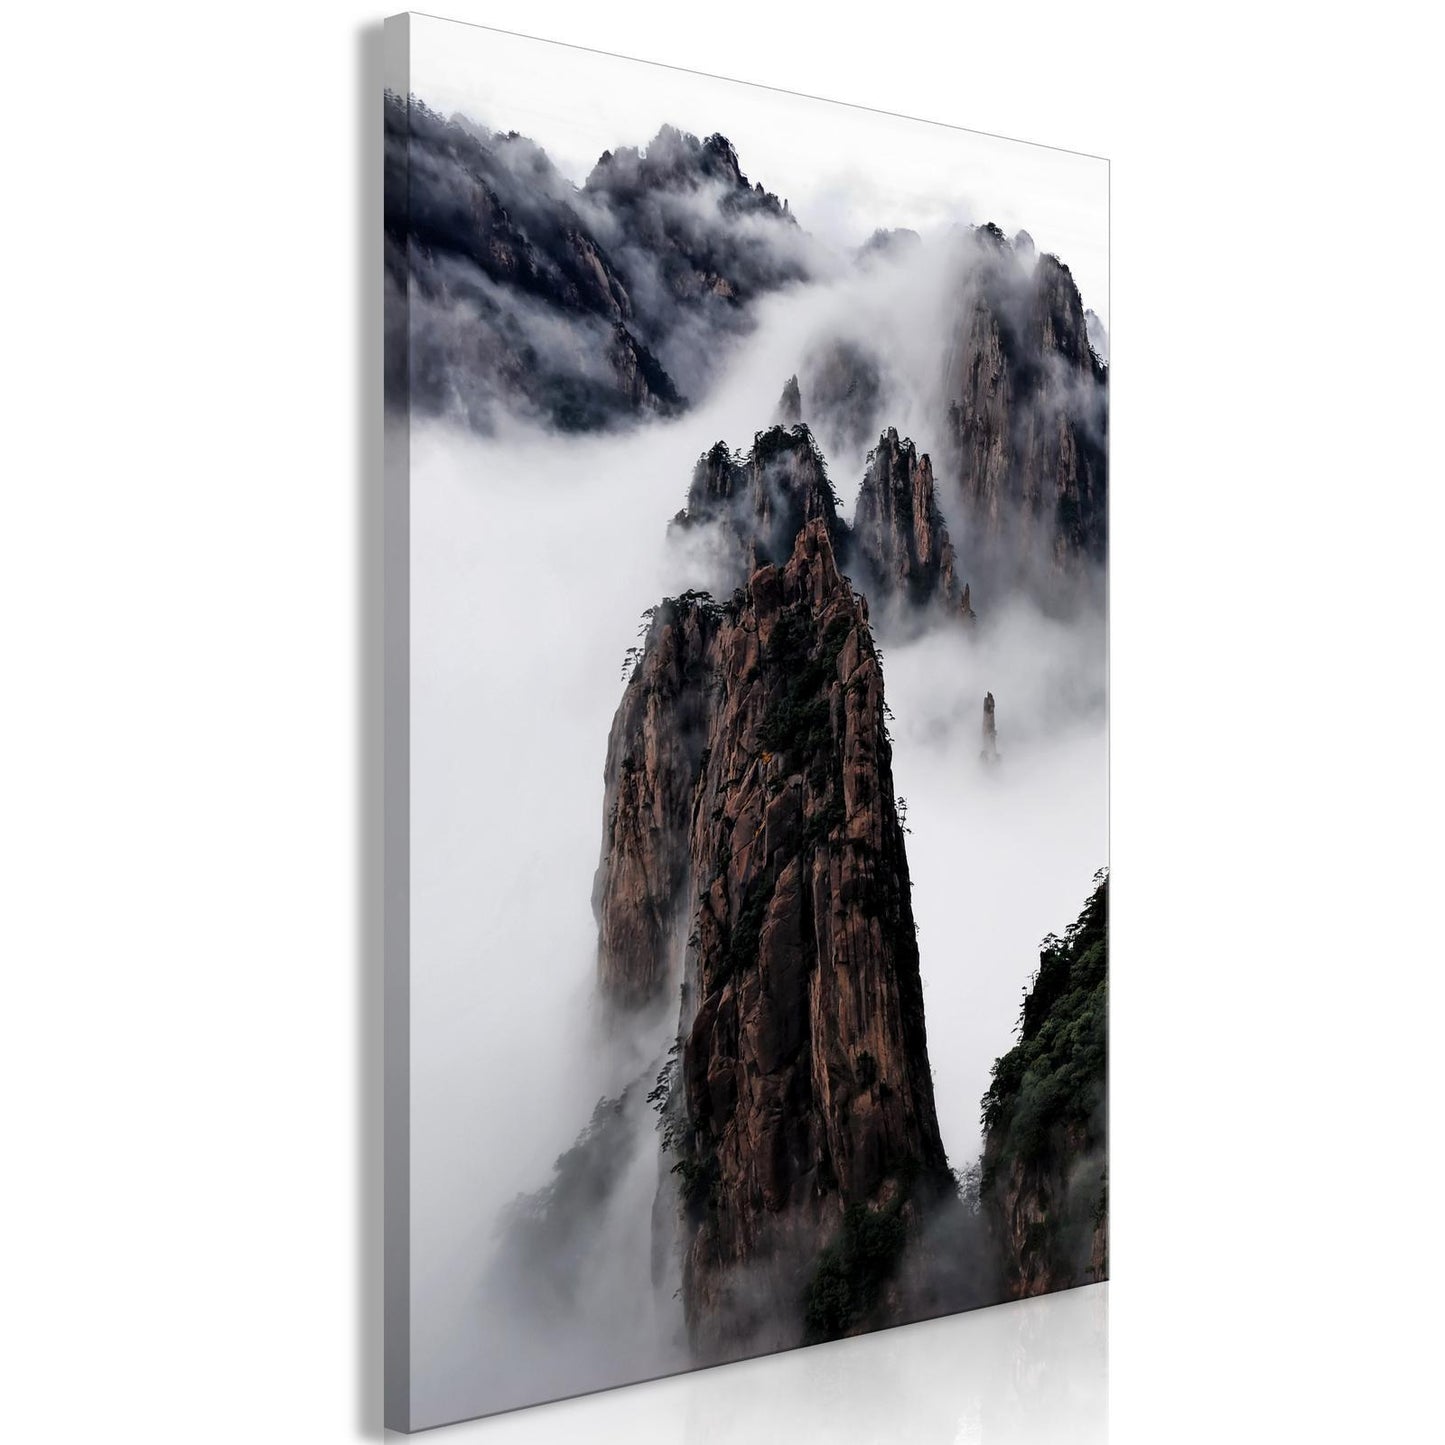 Painting - High Mountains in Mist (1-part) - Landscape of Clouds Amid Rocks